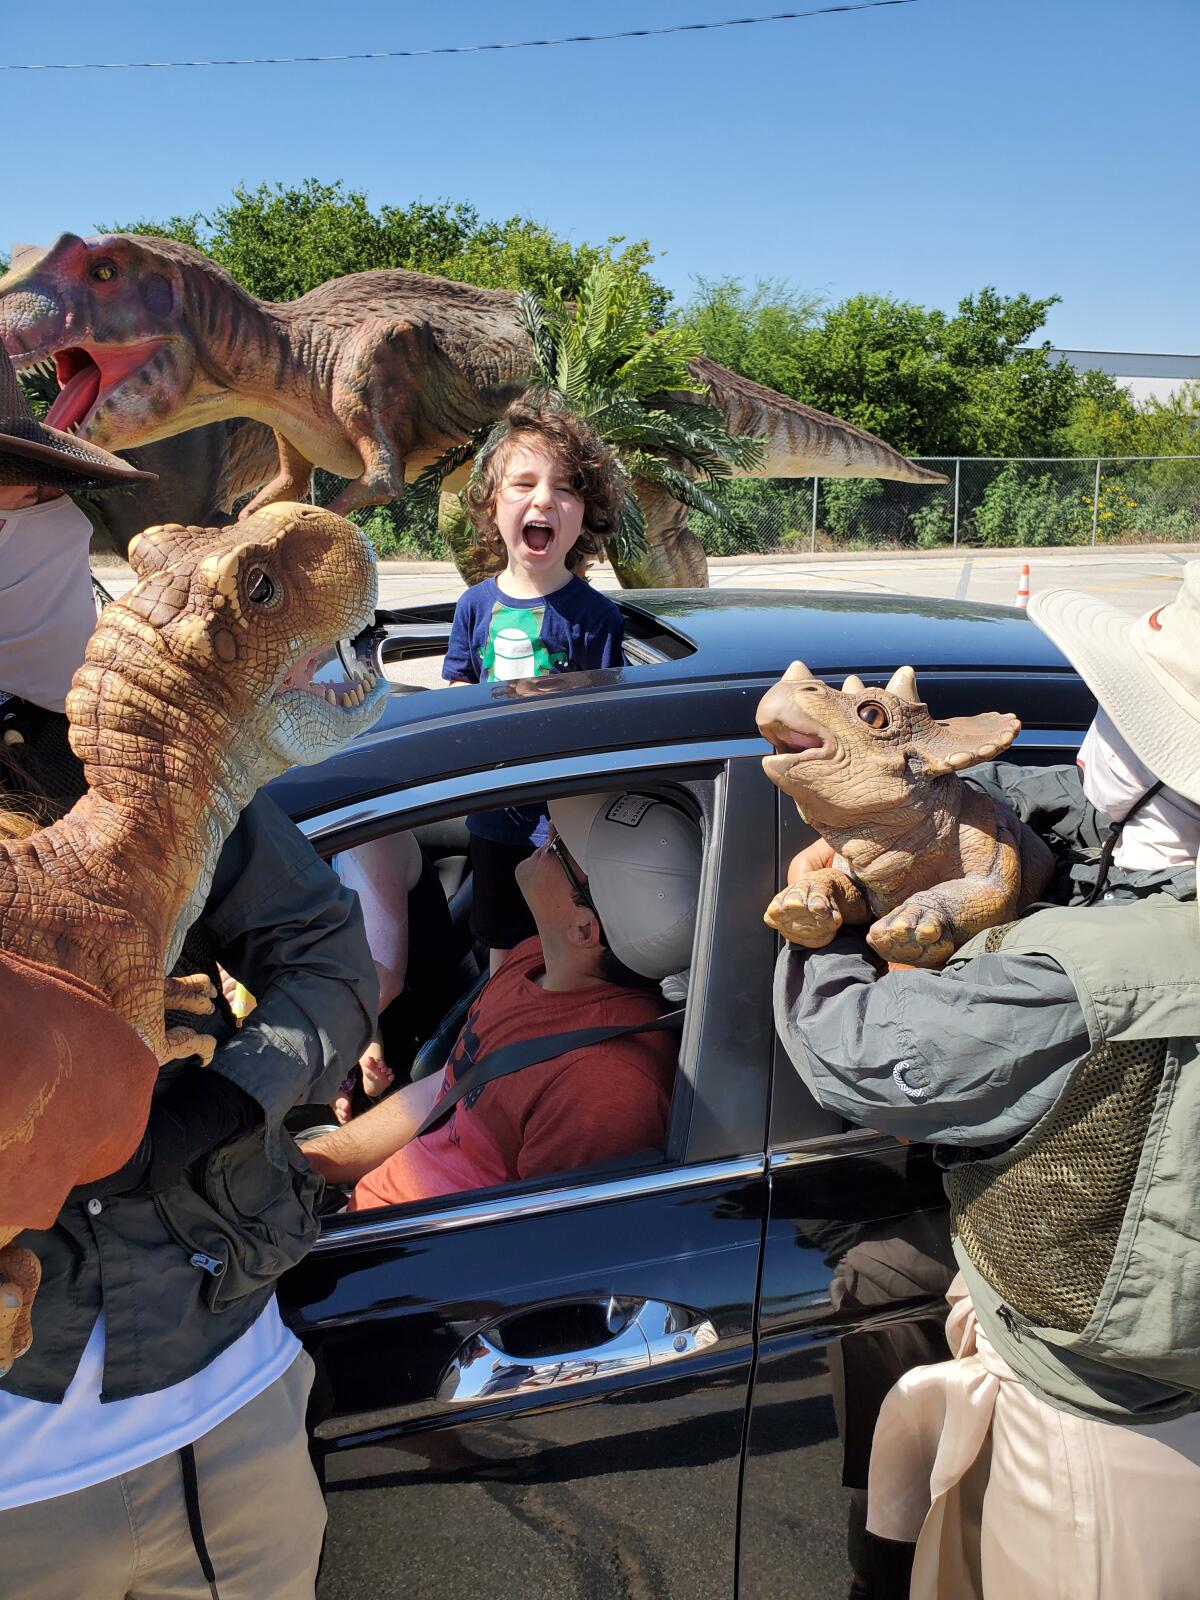 "Jurassic Quest" is a drive-thru dinosaur experience coming to Costa Mesa's OC fairgrounds